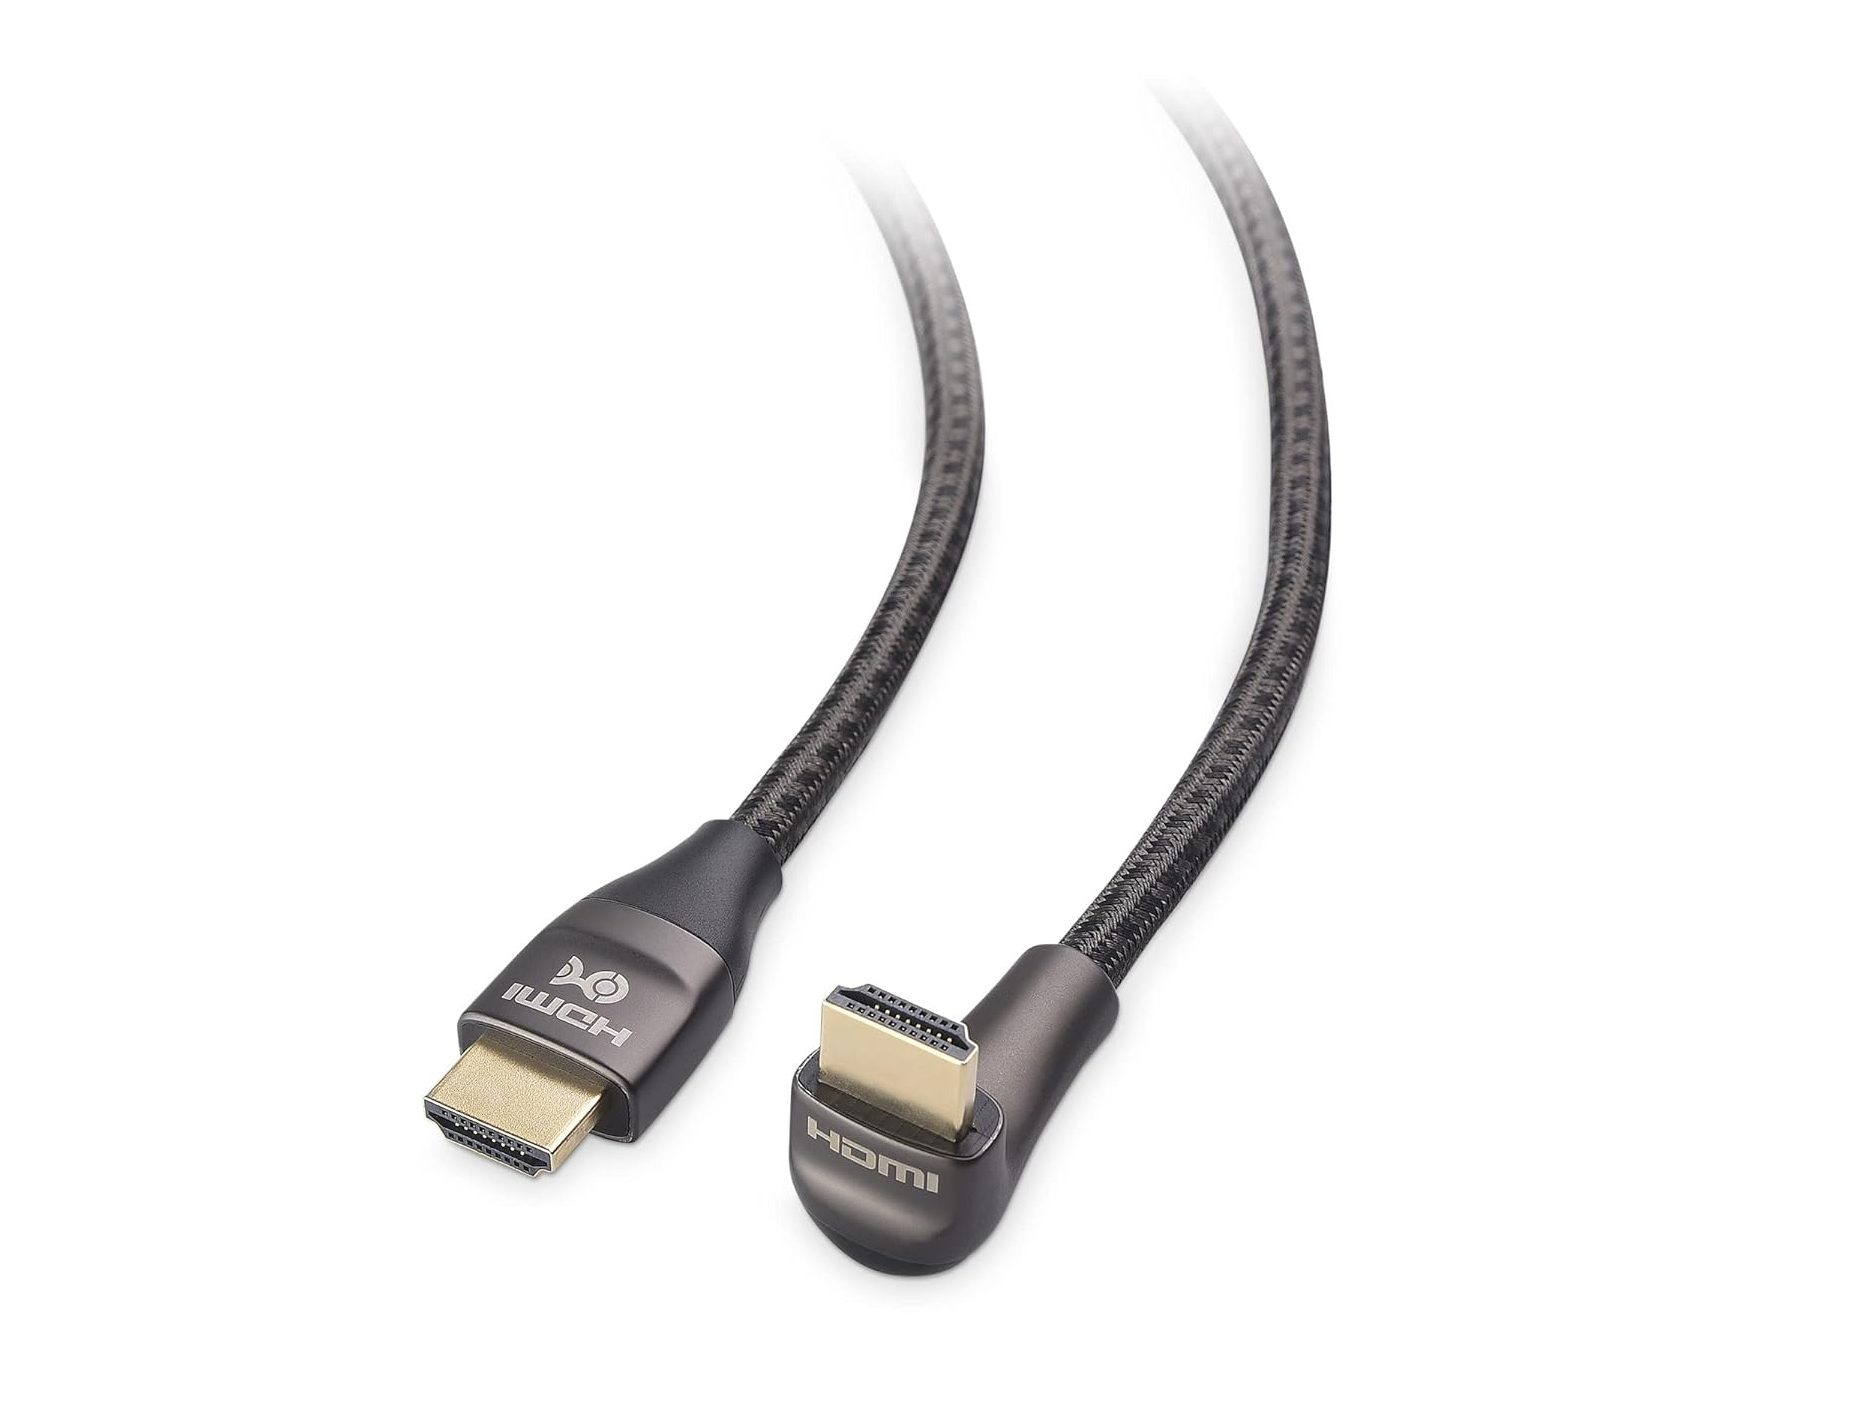 11 Best HDMI Adapter For Iphone for 2023